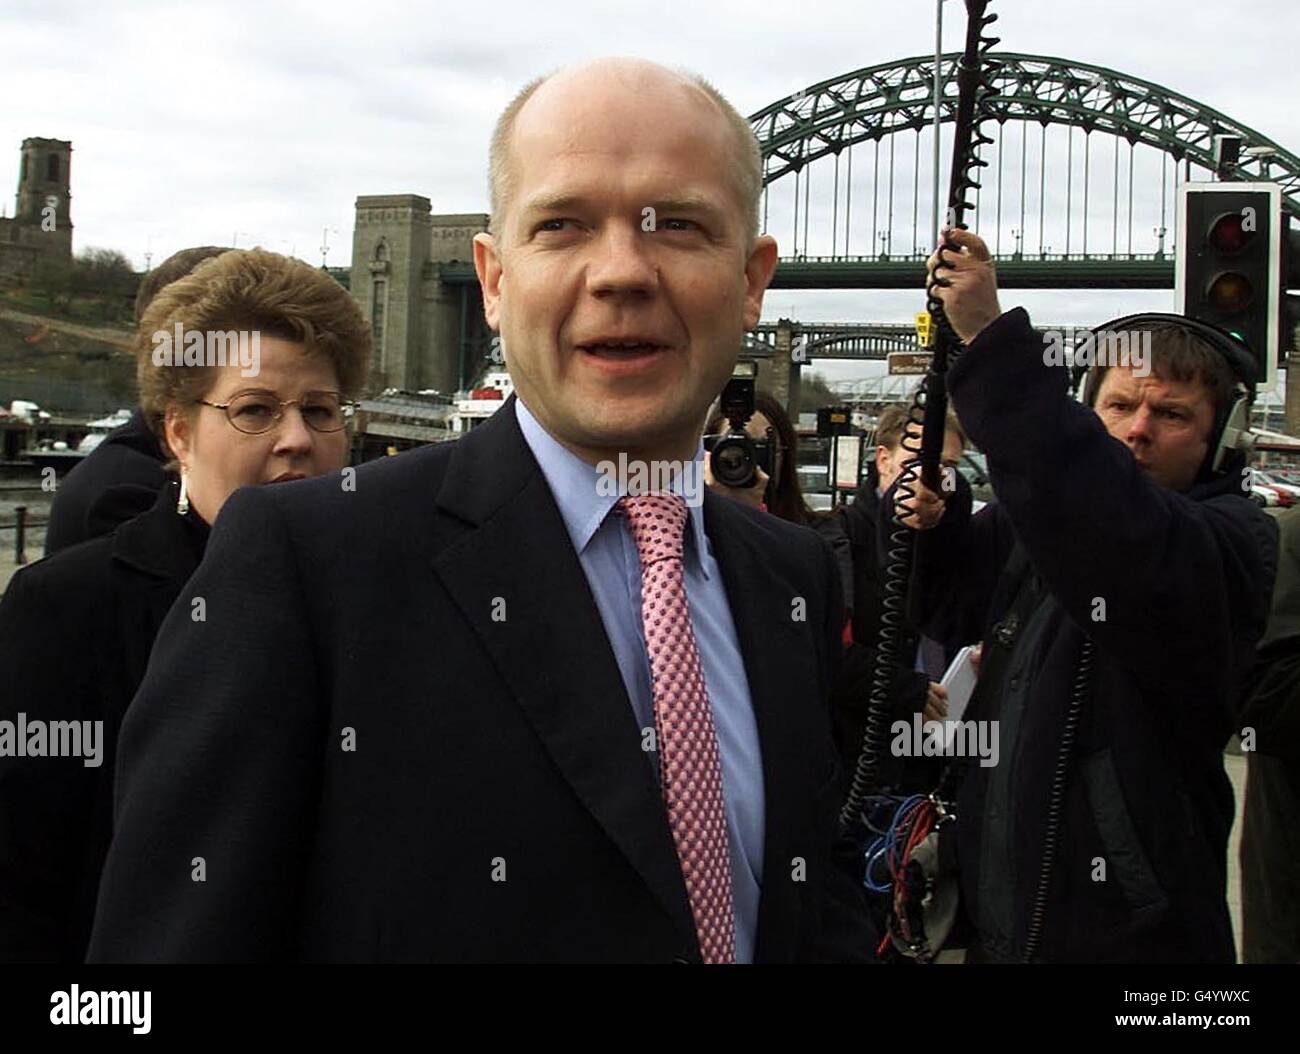 Conservative Party leader William Hague arriving at Newcastle Crown Court, to give evidence in the case of one of his constituents accused of smuggling rare parrots into Britain. Mr Hague will give evidence for the prosecution against Harry Sissen, 61. *Mr Sissen is accused of four counts of smuggling and two counts of illegally selling rare parrots. Stock Photo